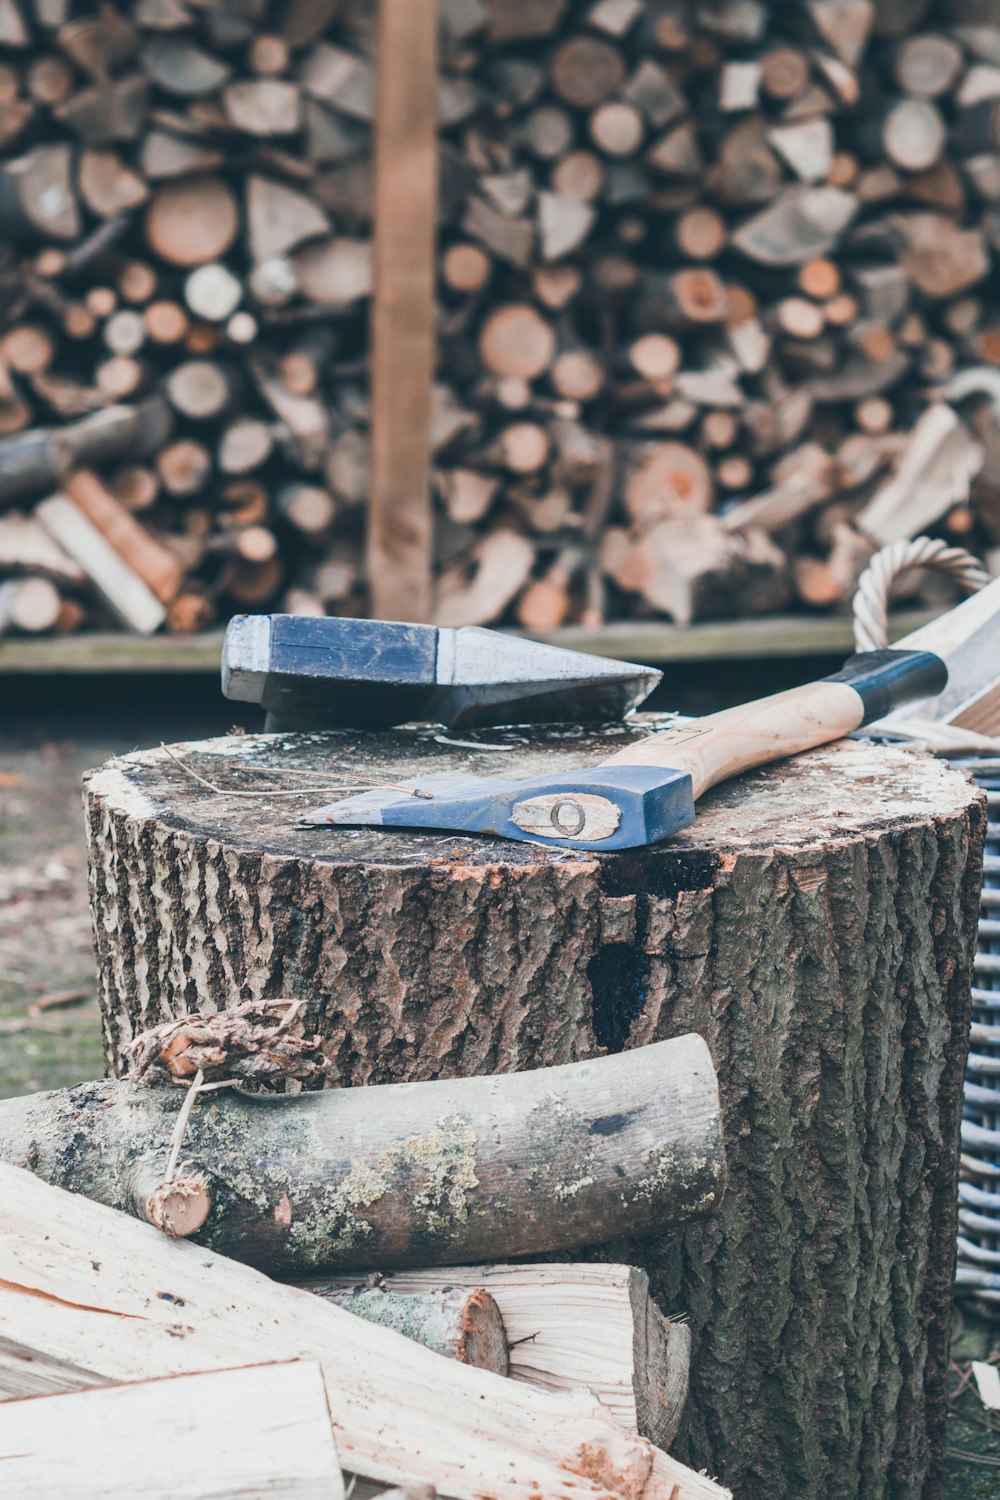 50,000+ Wood Cutting Pictures  Download Free Images on Unsplash